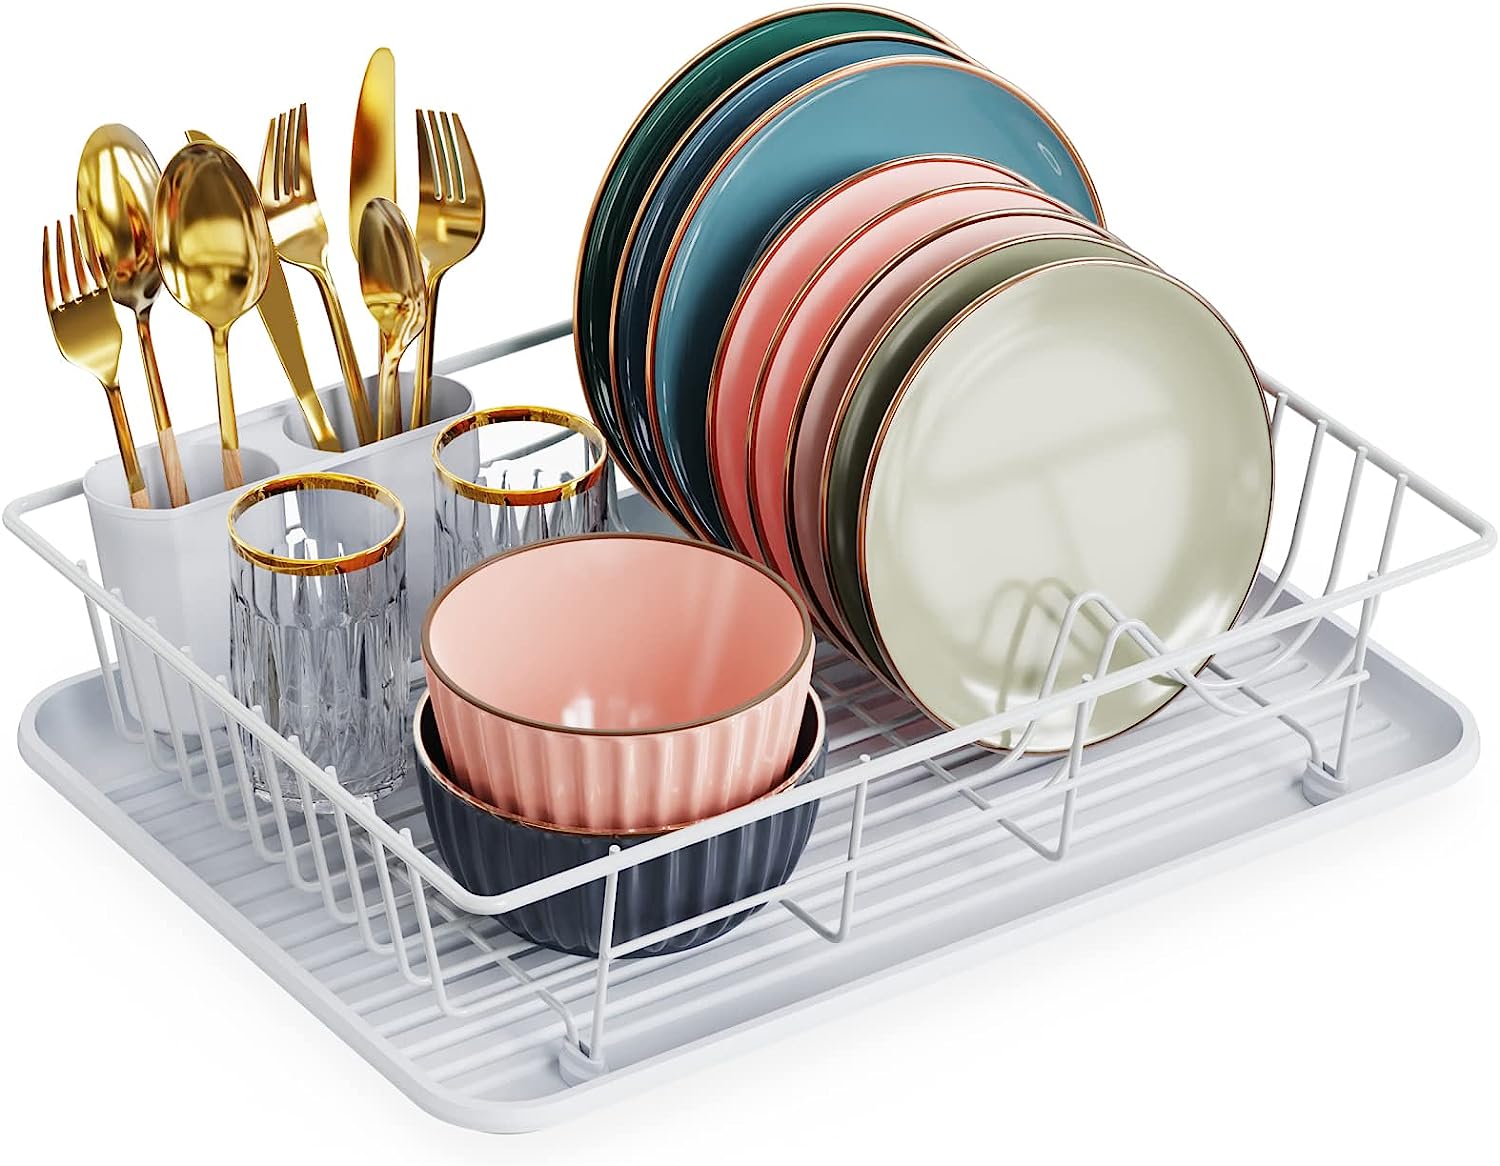 GSlife Dish Drying Rack for Kitchen Counter, Dish Rack [...]